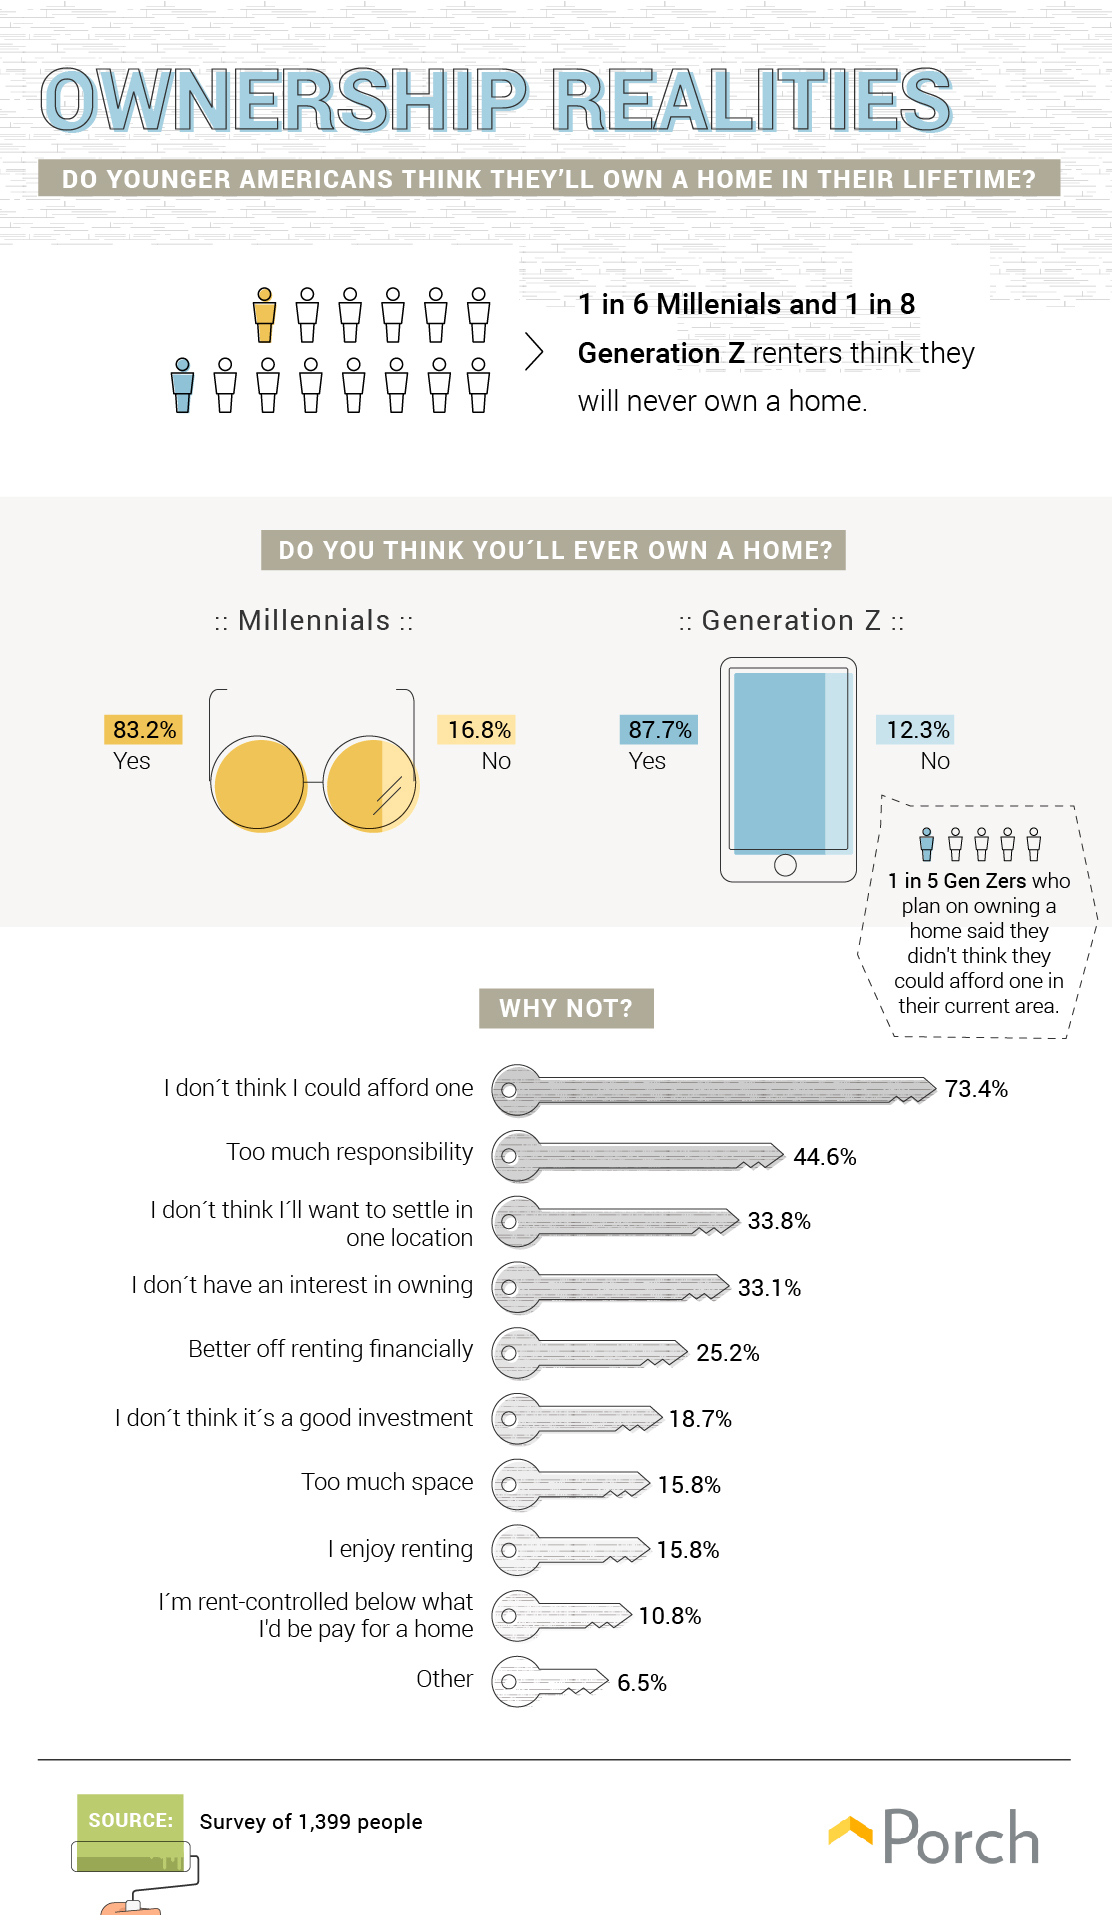 Percentage of millennials and Gen Z who think they can afford a house